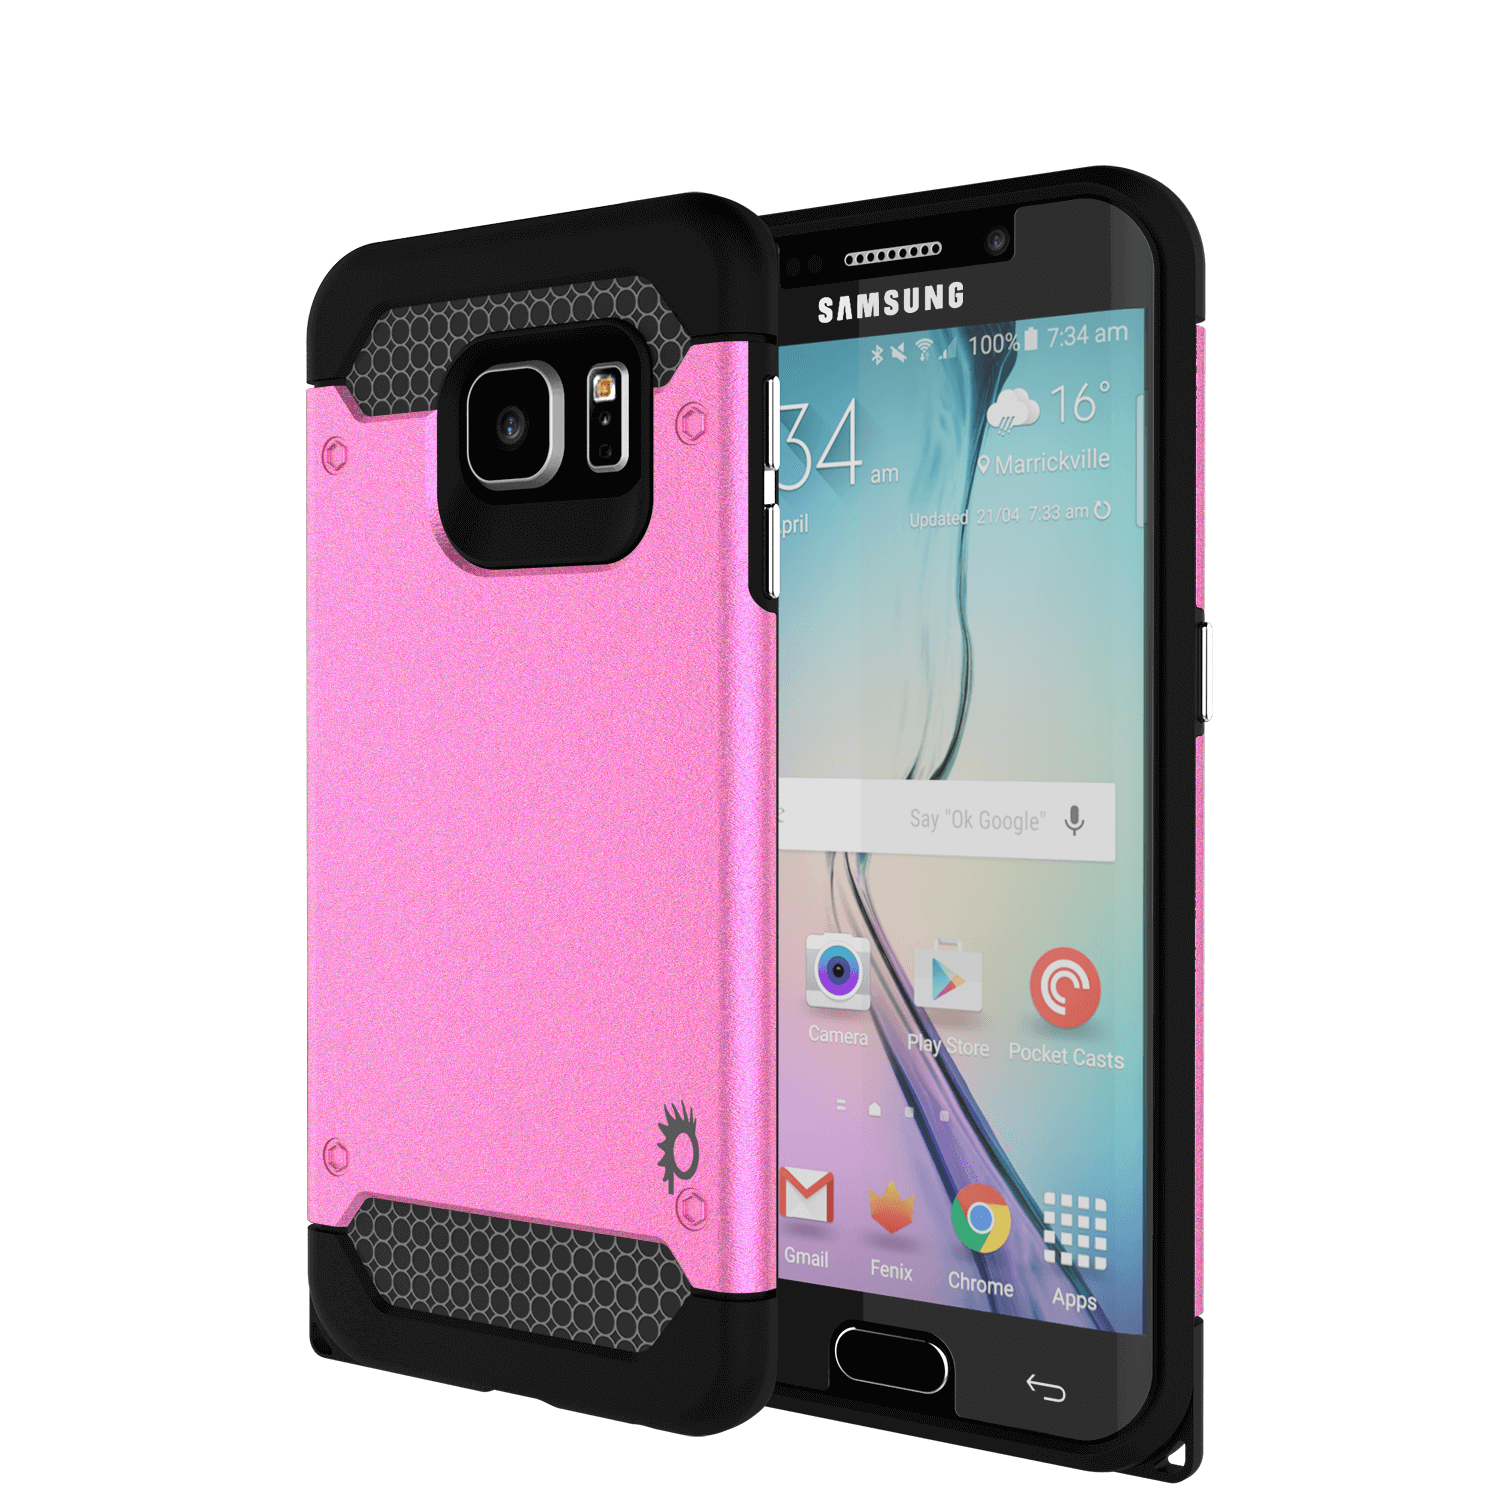 Galaxy s6 EDGE Case PunkCase Galactic Pink Series Slim Protective Armor Soft Cover Case w/ Tempered Glass Protector Lifetime Warranty (Color in image: pink)